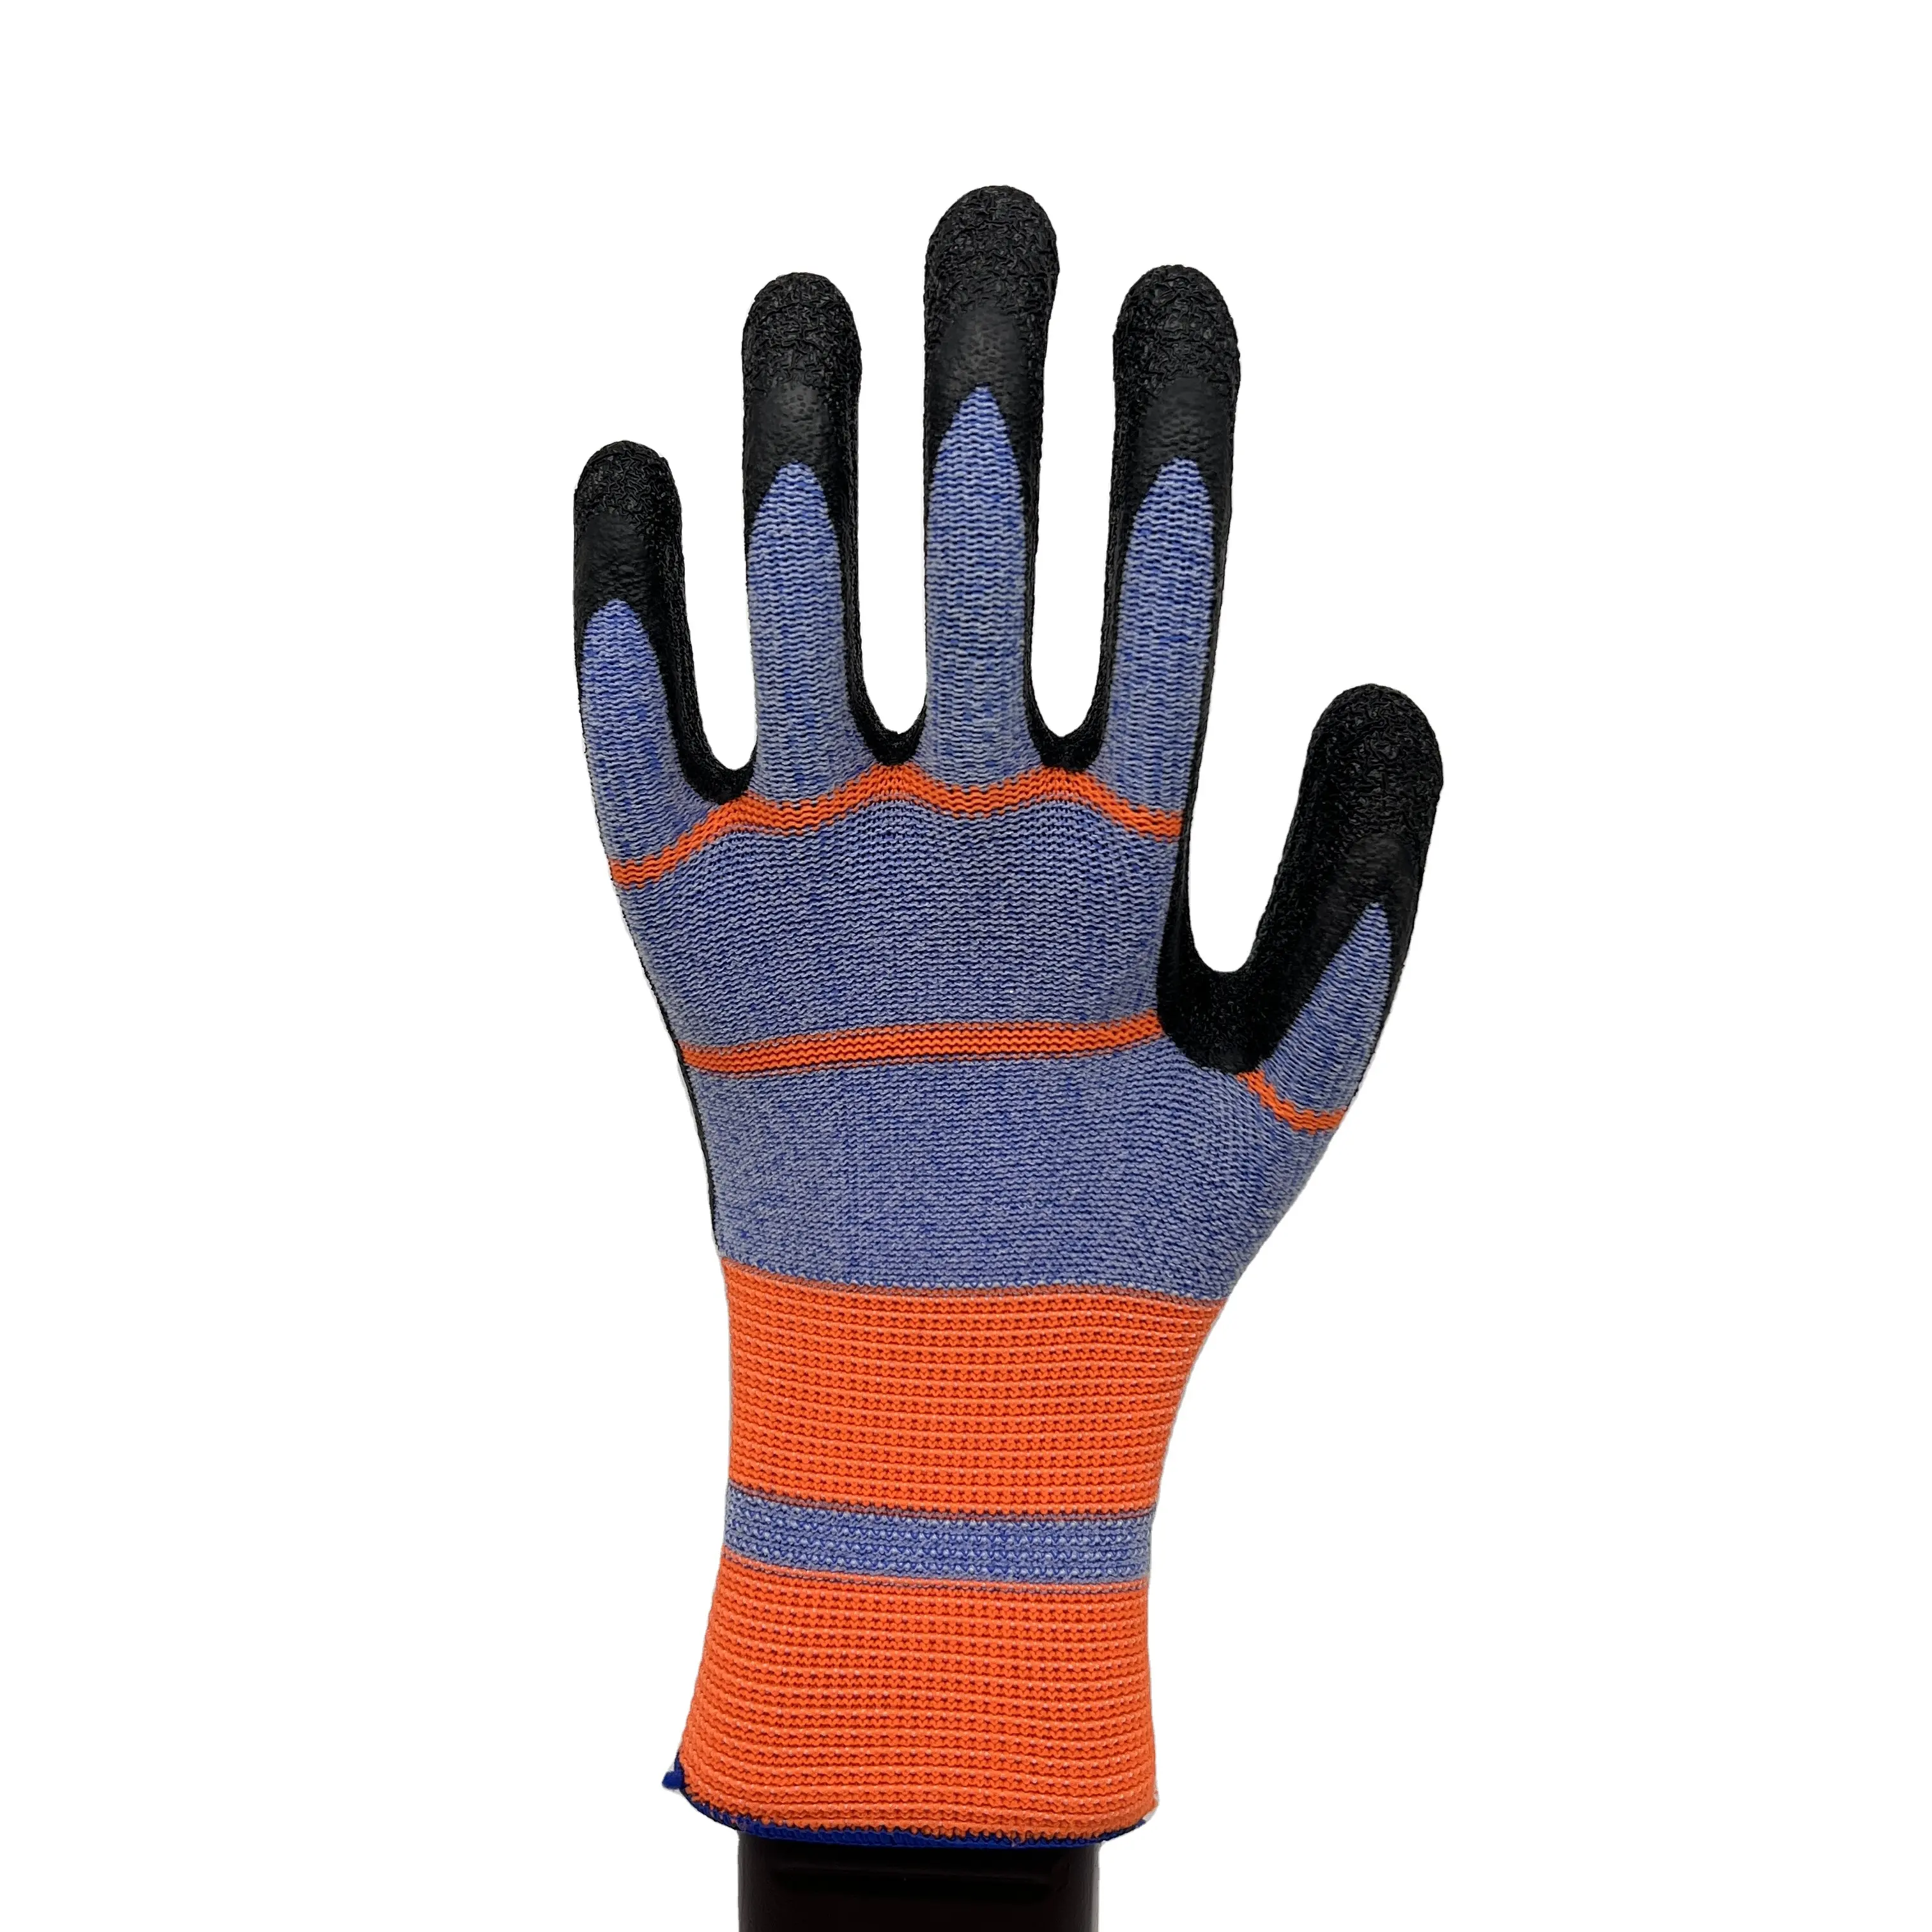 13 Gauge Wrinkle Latex Coating Work Gloves With Nylon Knitted Glove Liner For Industrial Work